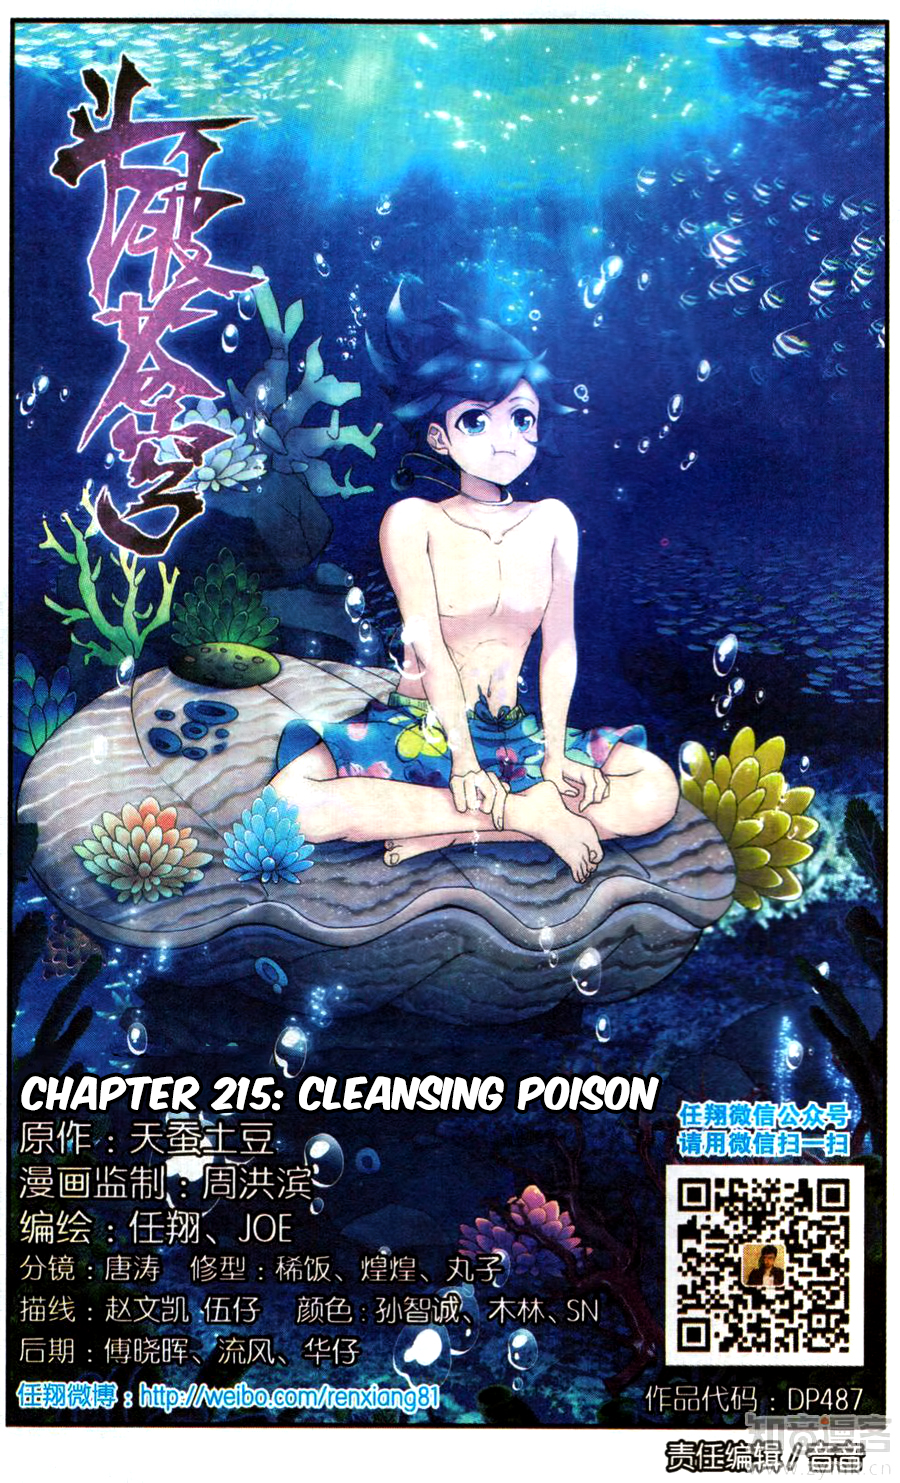 Fights Break Sphere Ch. 215 Cleansing Poison